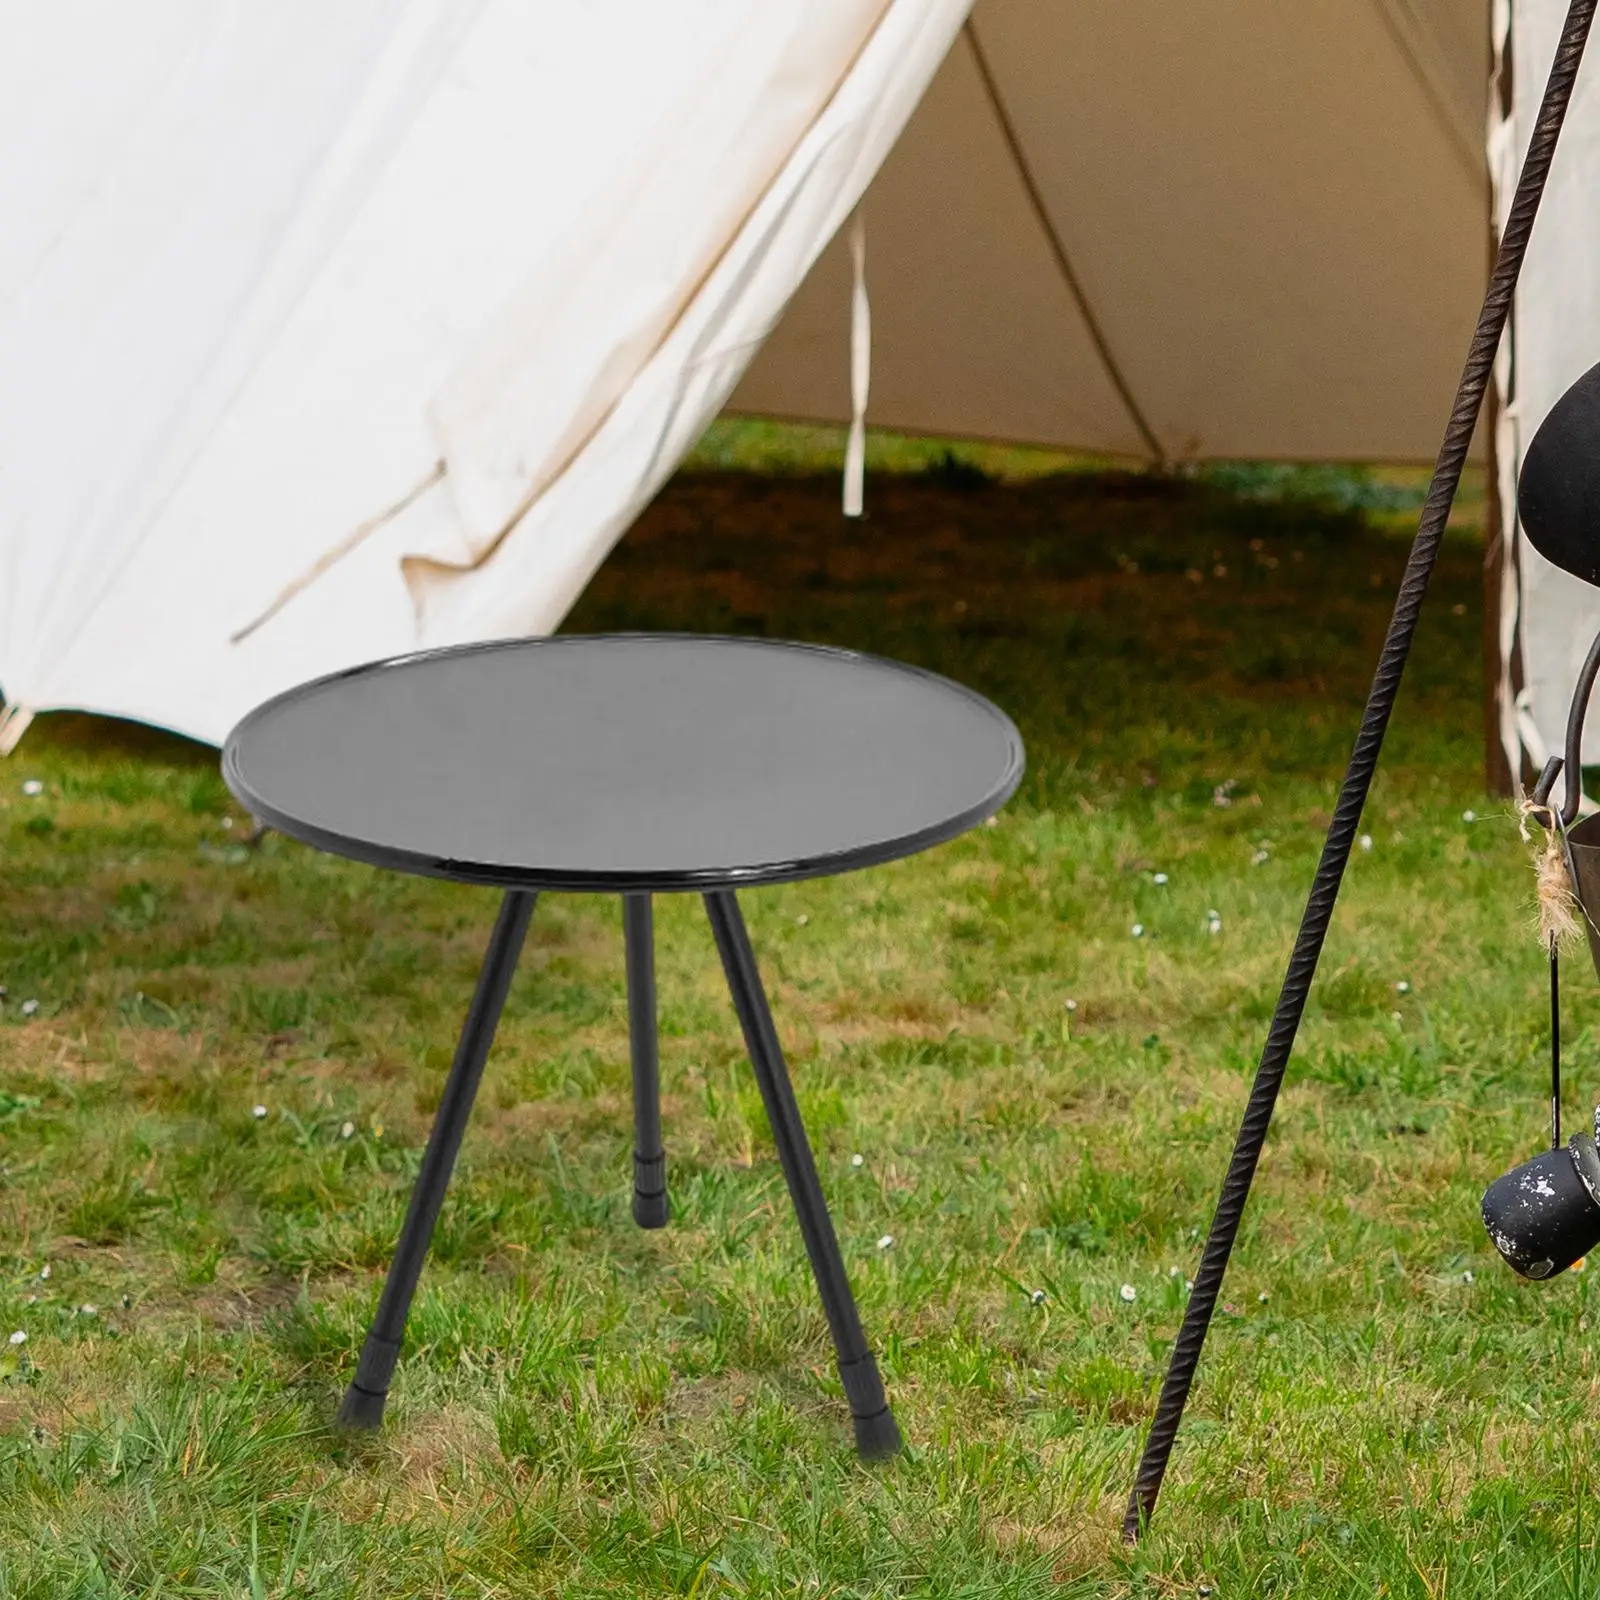 Portable Triangular Round Table Foldable Stable Furniture Stable Telescopic Lifting Desk for Backpacking Picnic Party Beach BBQ